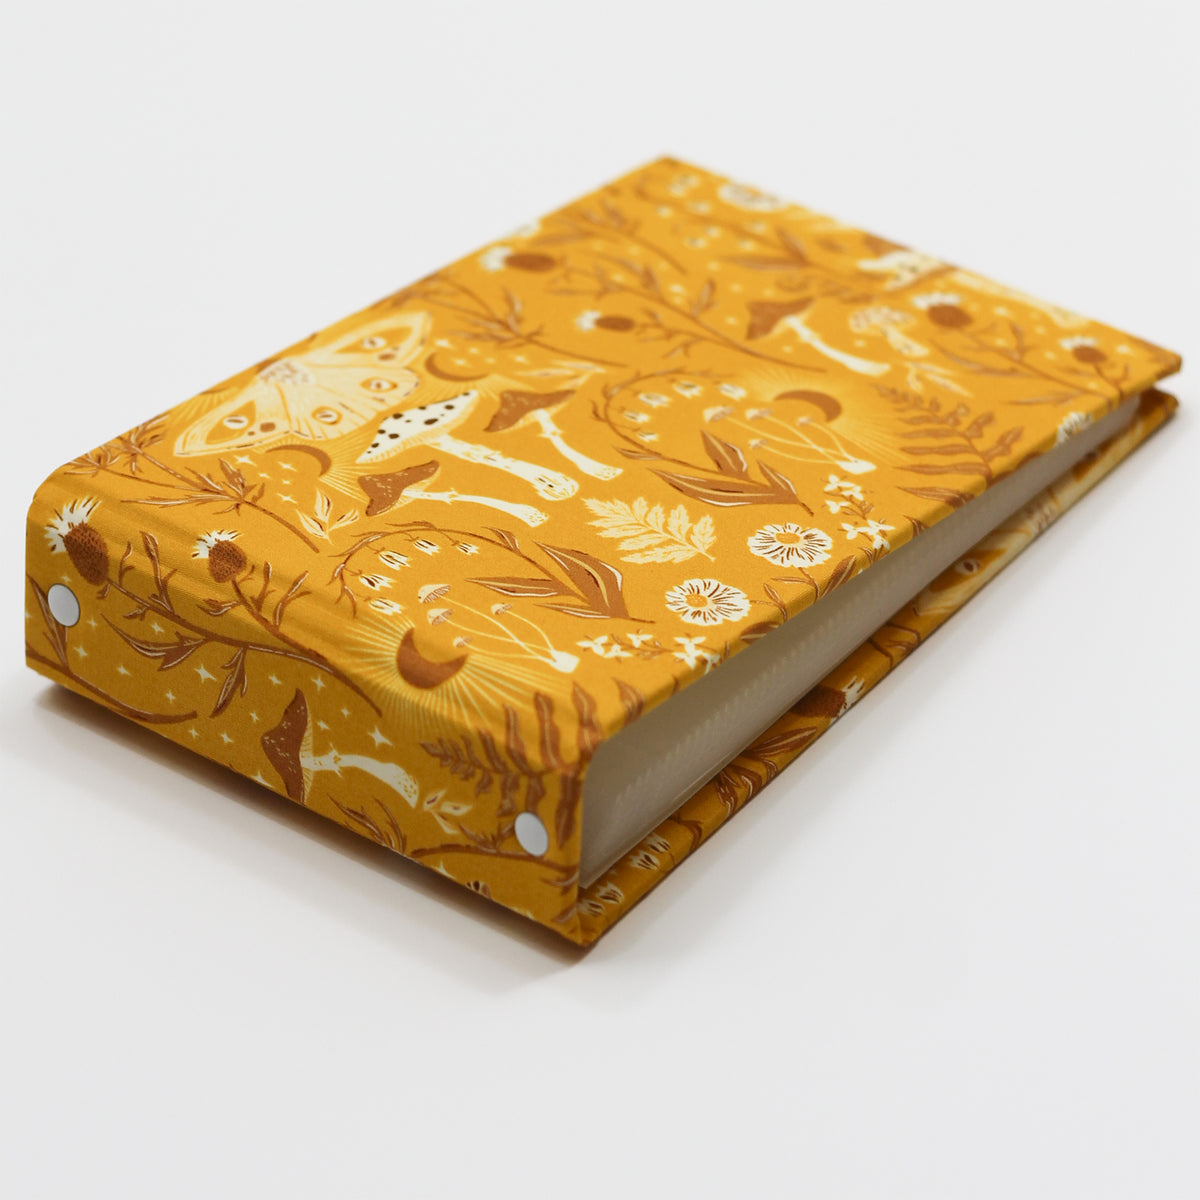 Small Photo Binder | for 4x6 Photos | with Golden Thistle Fabric Cover